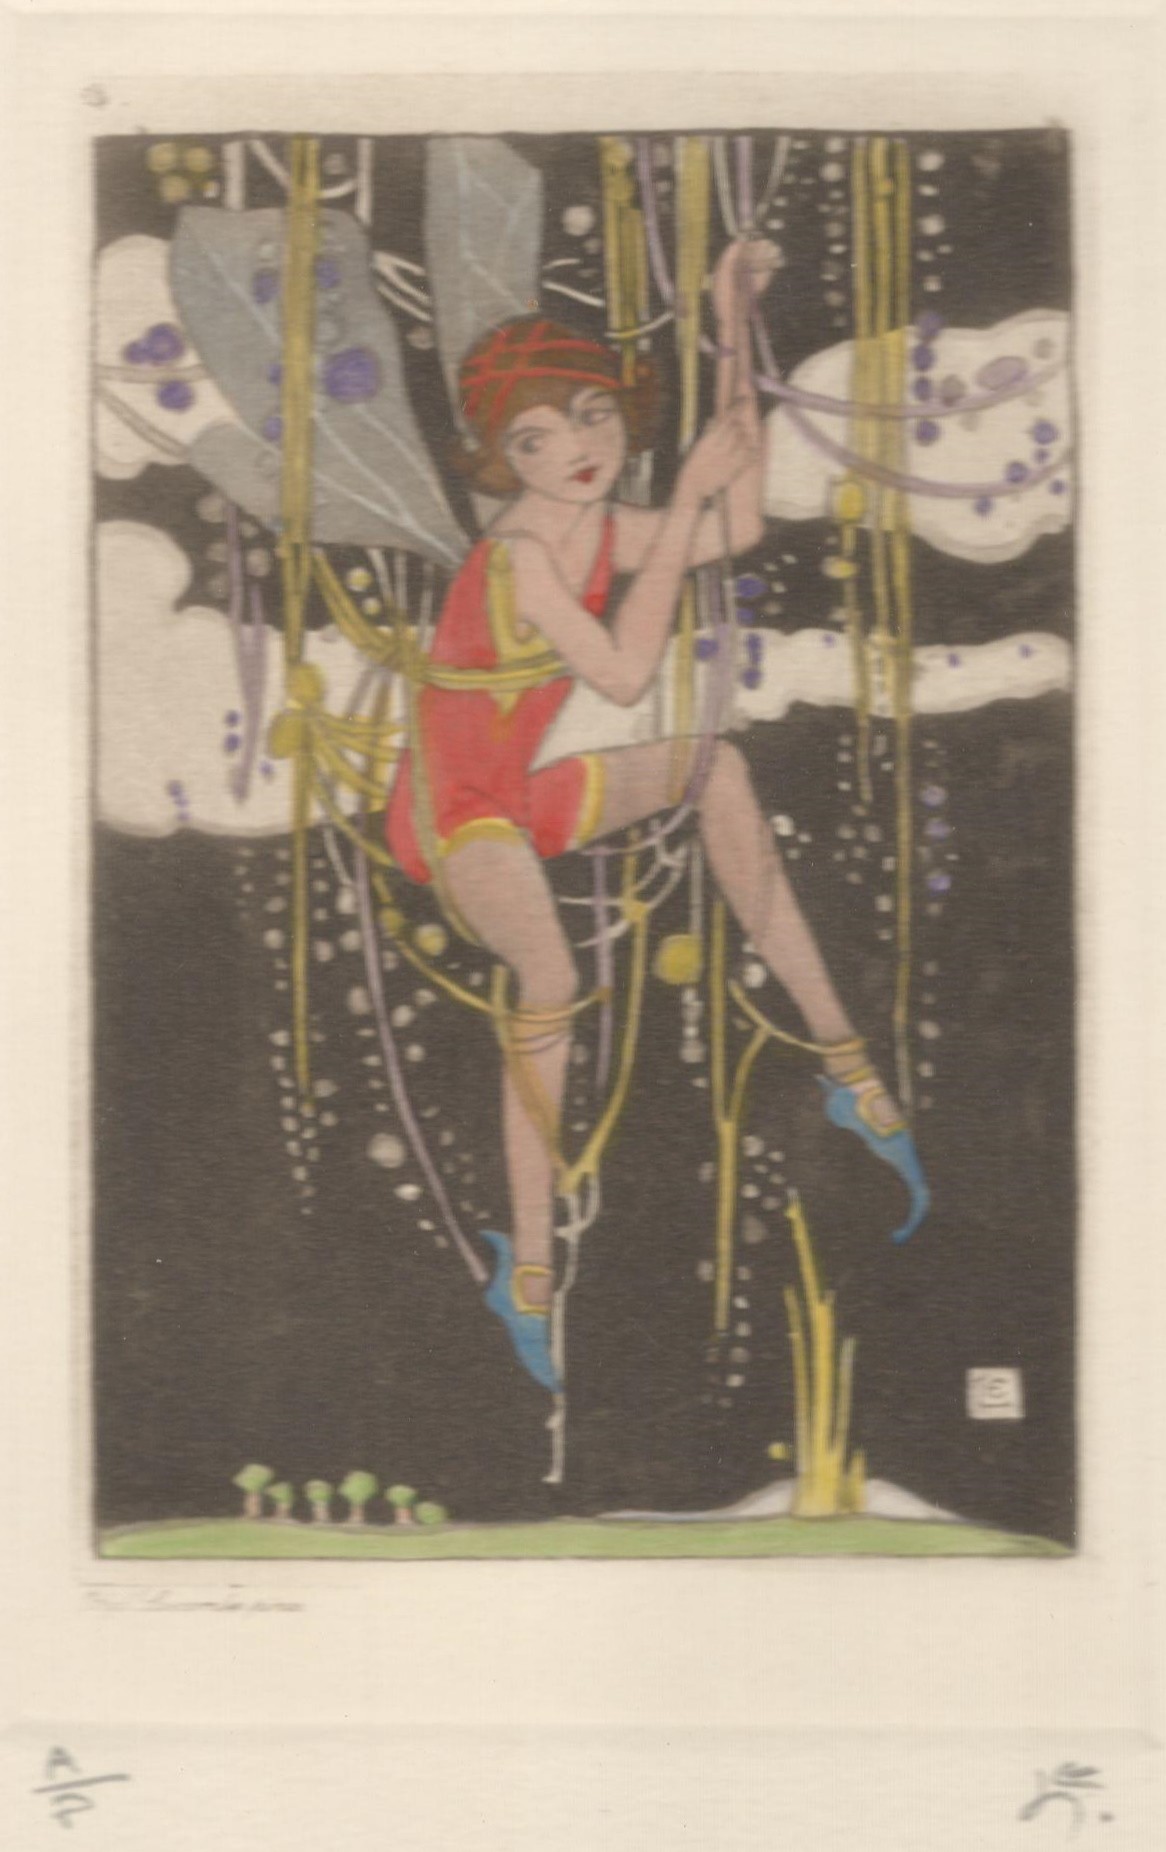 ETHEL LARCOMBE (1876-1940) PIXIE HAND-COLOURED ETCHING ON WOVE EARLY 20th century ARTIST PROOF